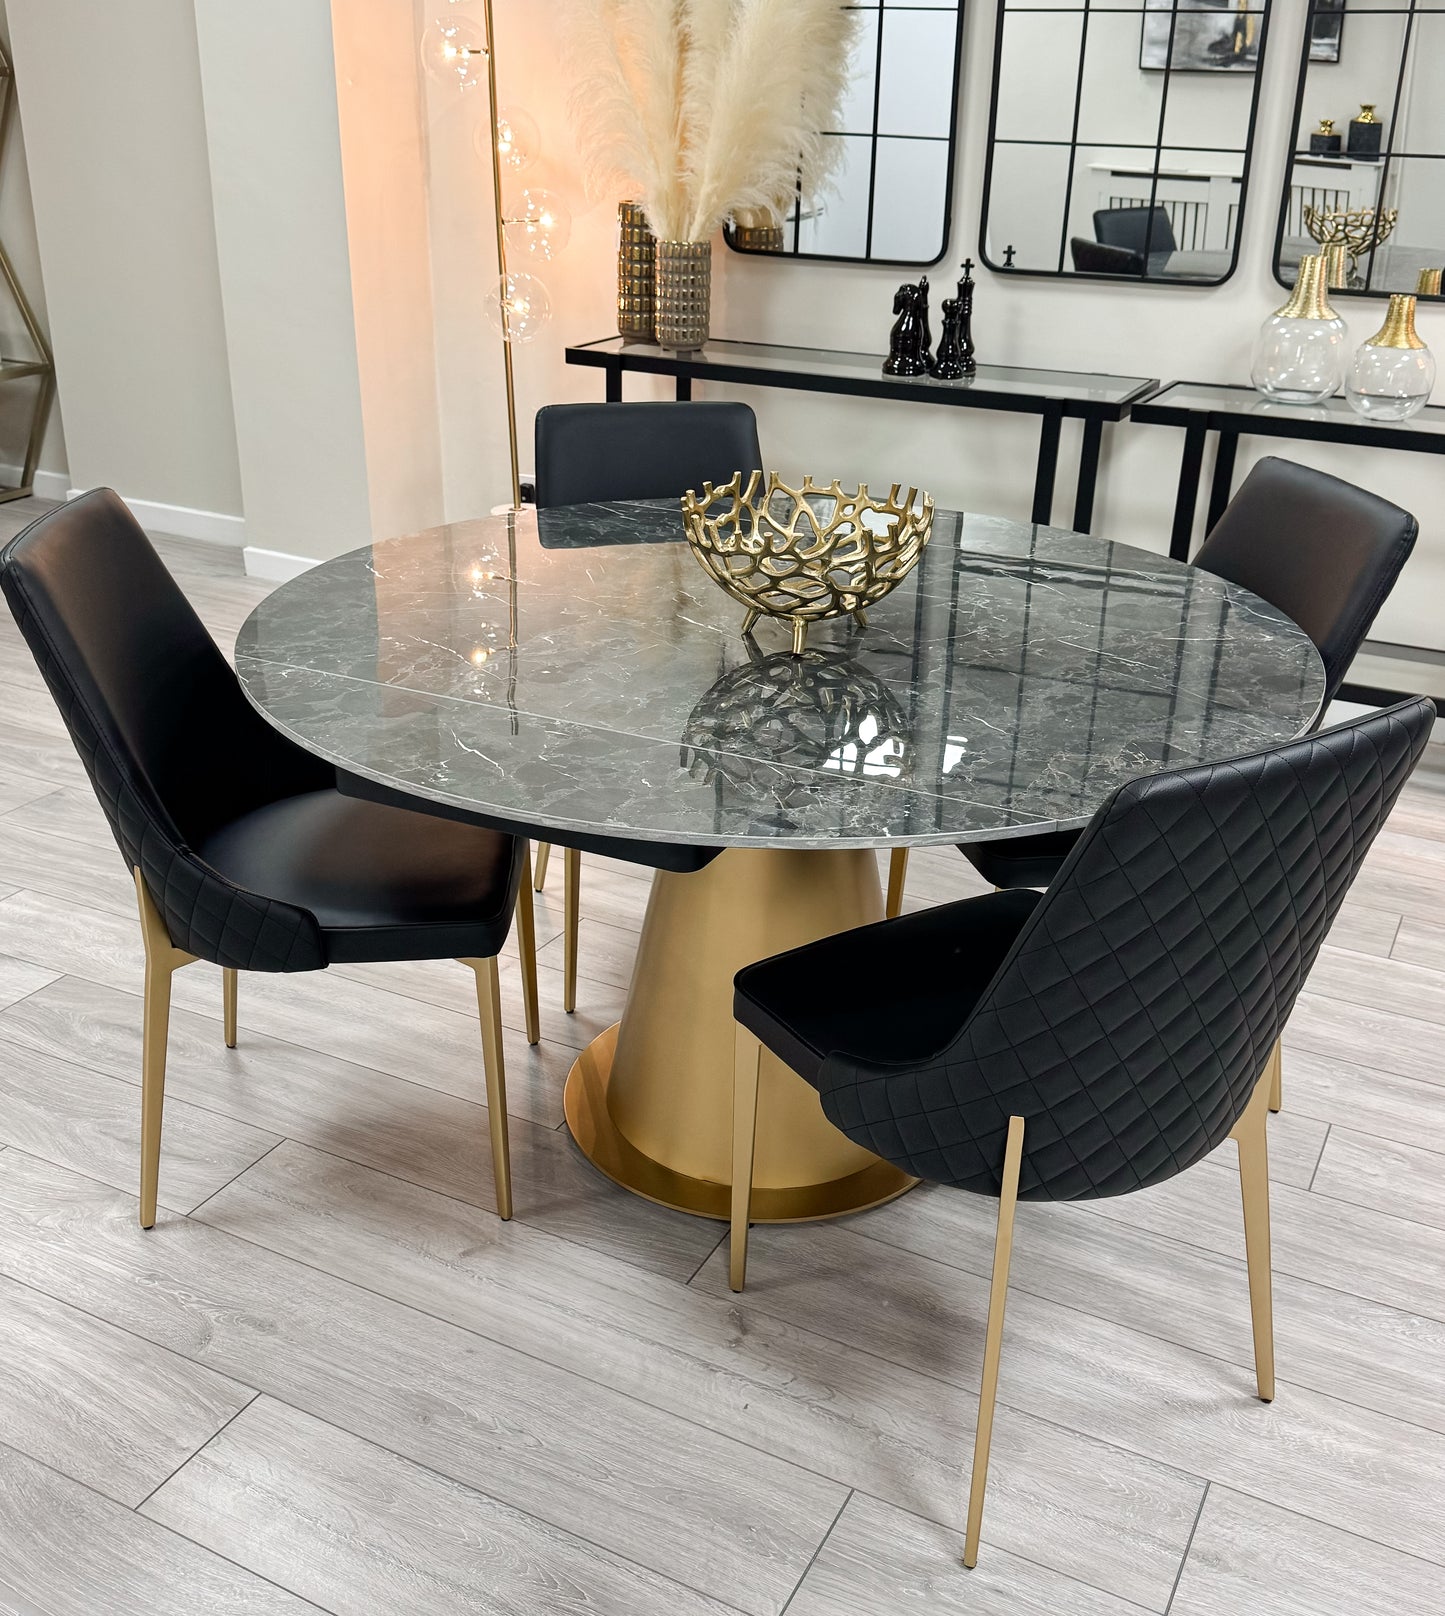 Black Ceramic Marble Effect Extending Table with 4 Black Faux Leather Chair Set